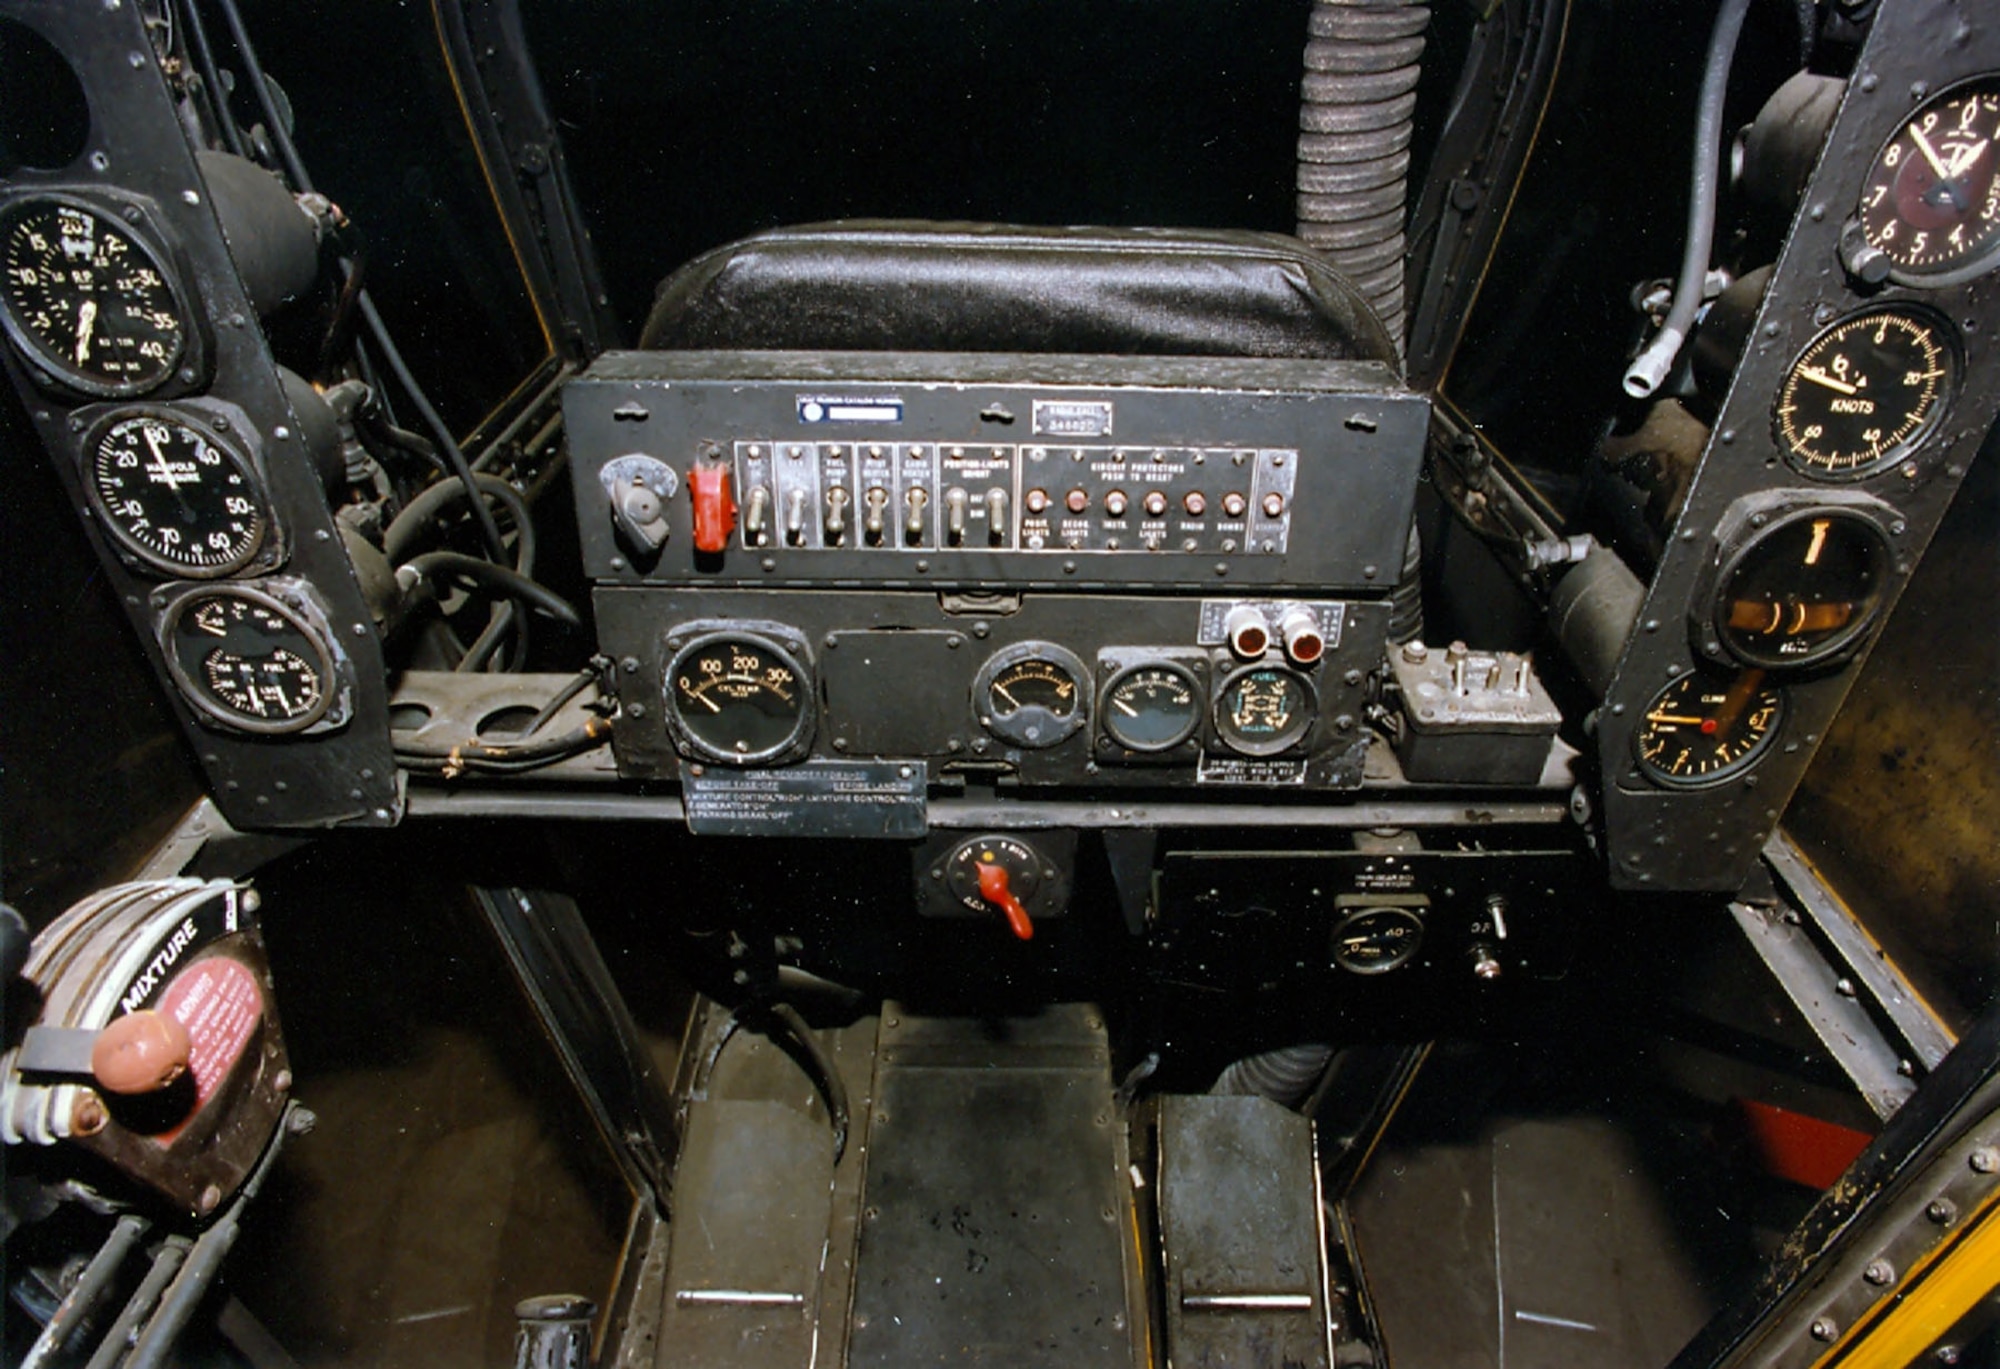 DAYTON, Ohio -- Consolidated OA-10 cockpit at the National Museum of the United States Air Force. (U.S. Air Force photo)